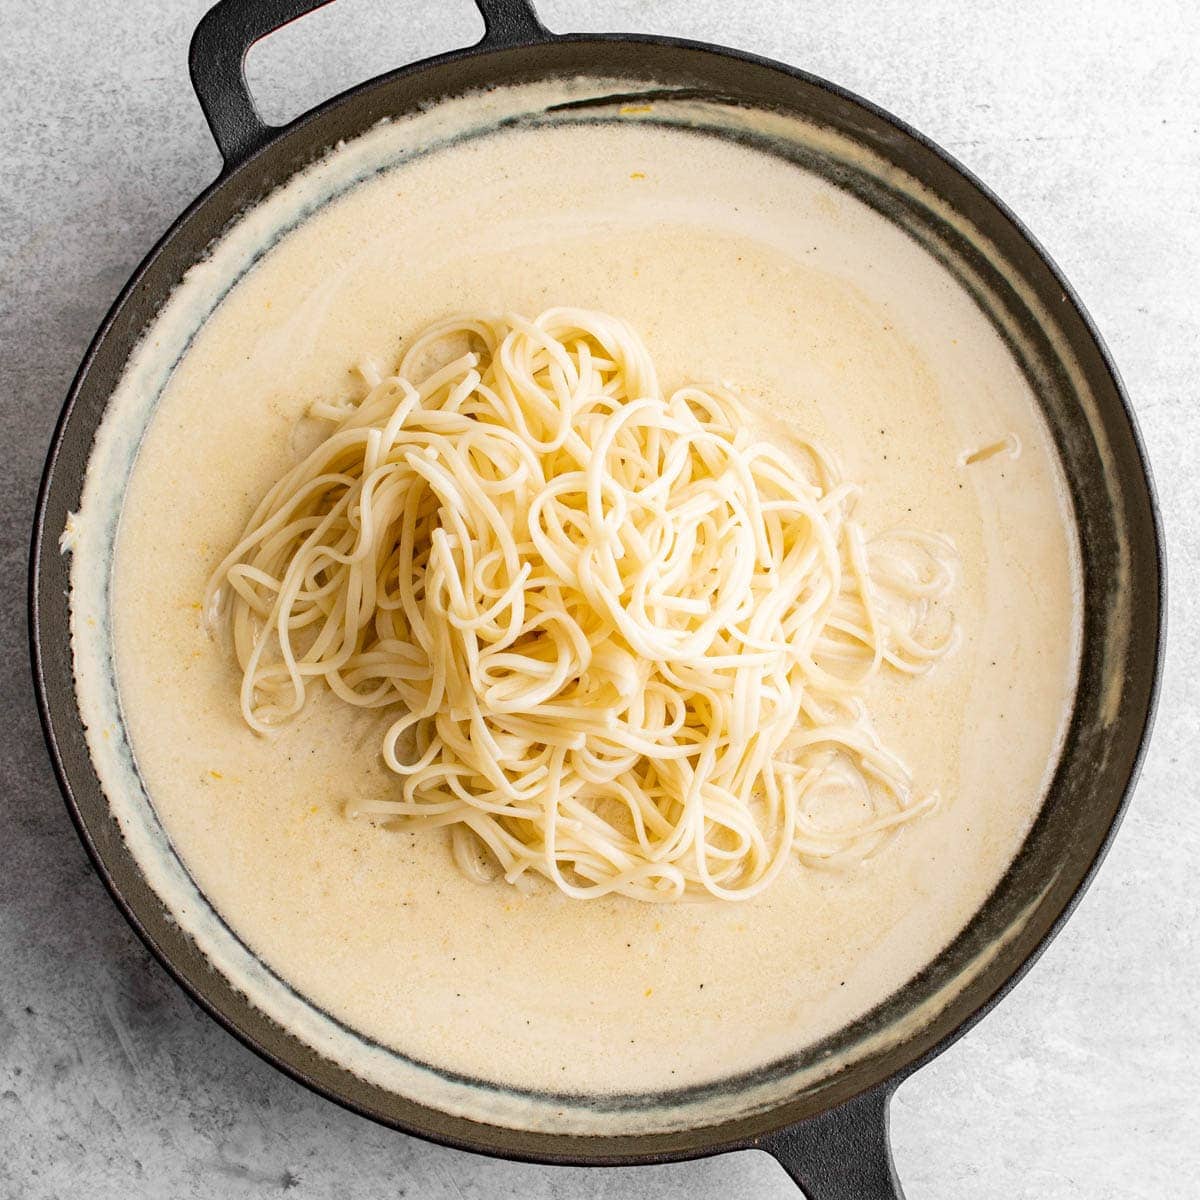 lemon butter sauce and pasta in a skillet